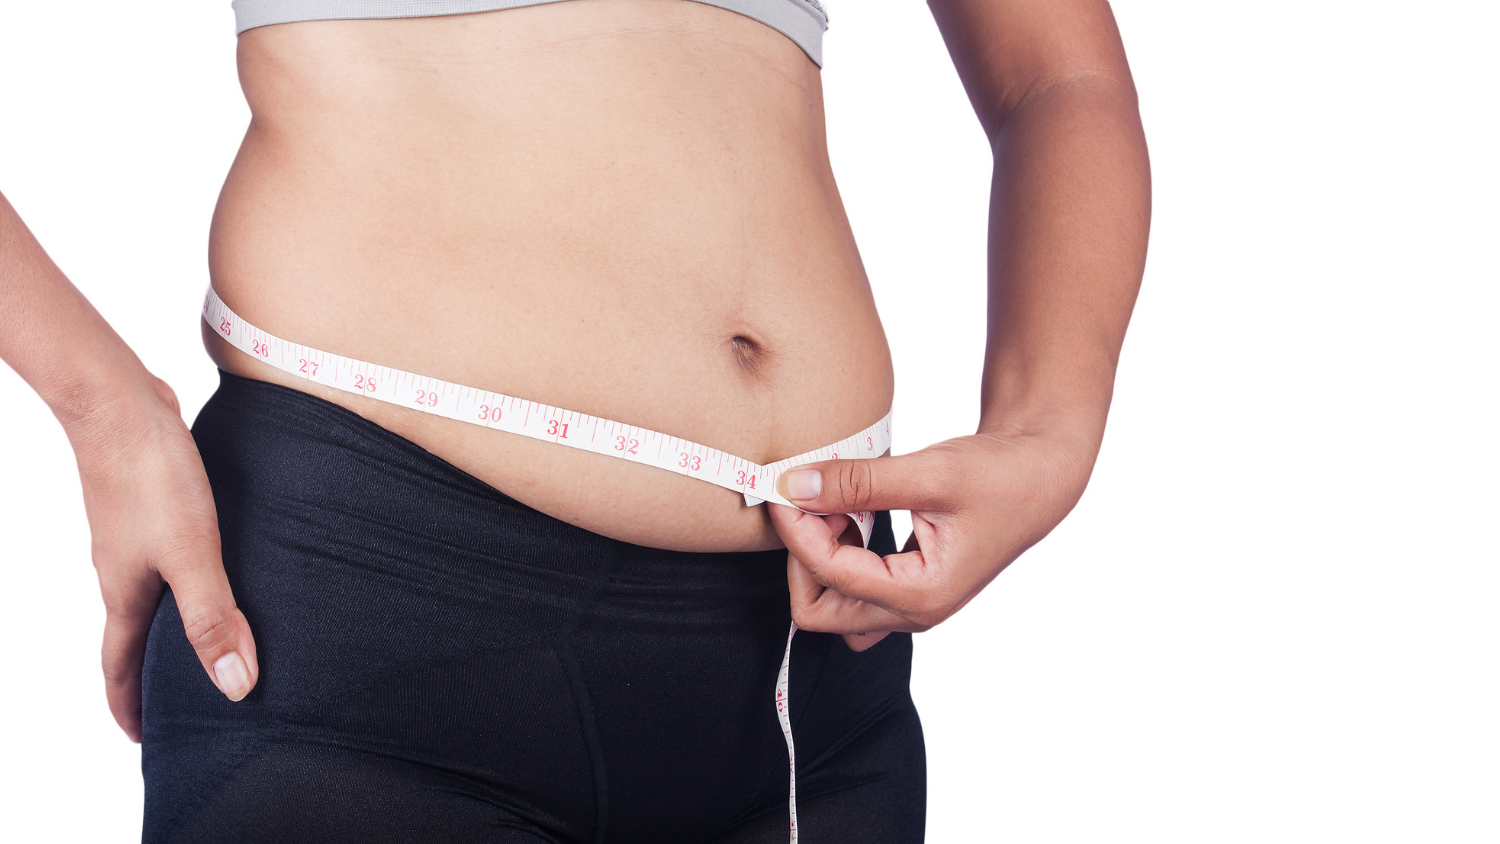 Incinerate Your Gut with these Belly Burner Tips